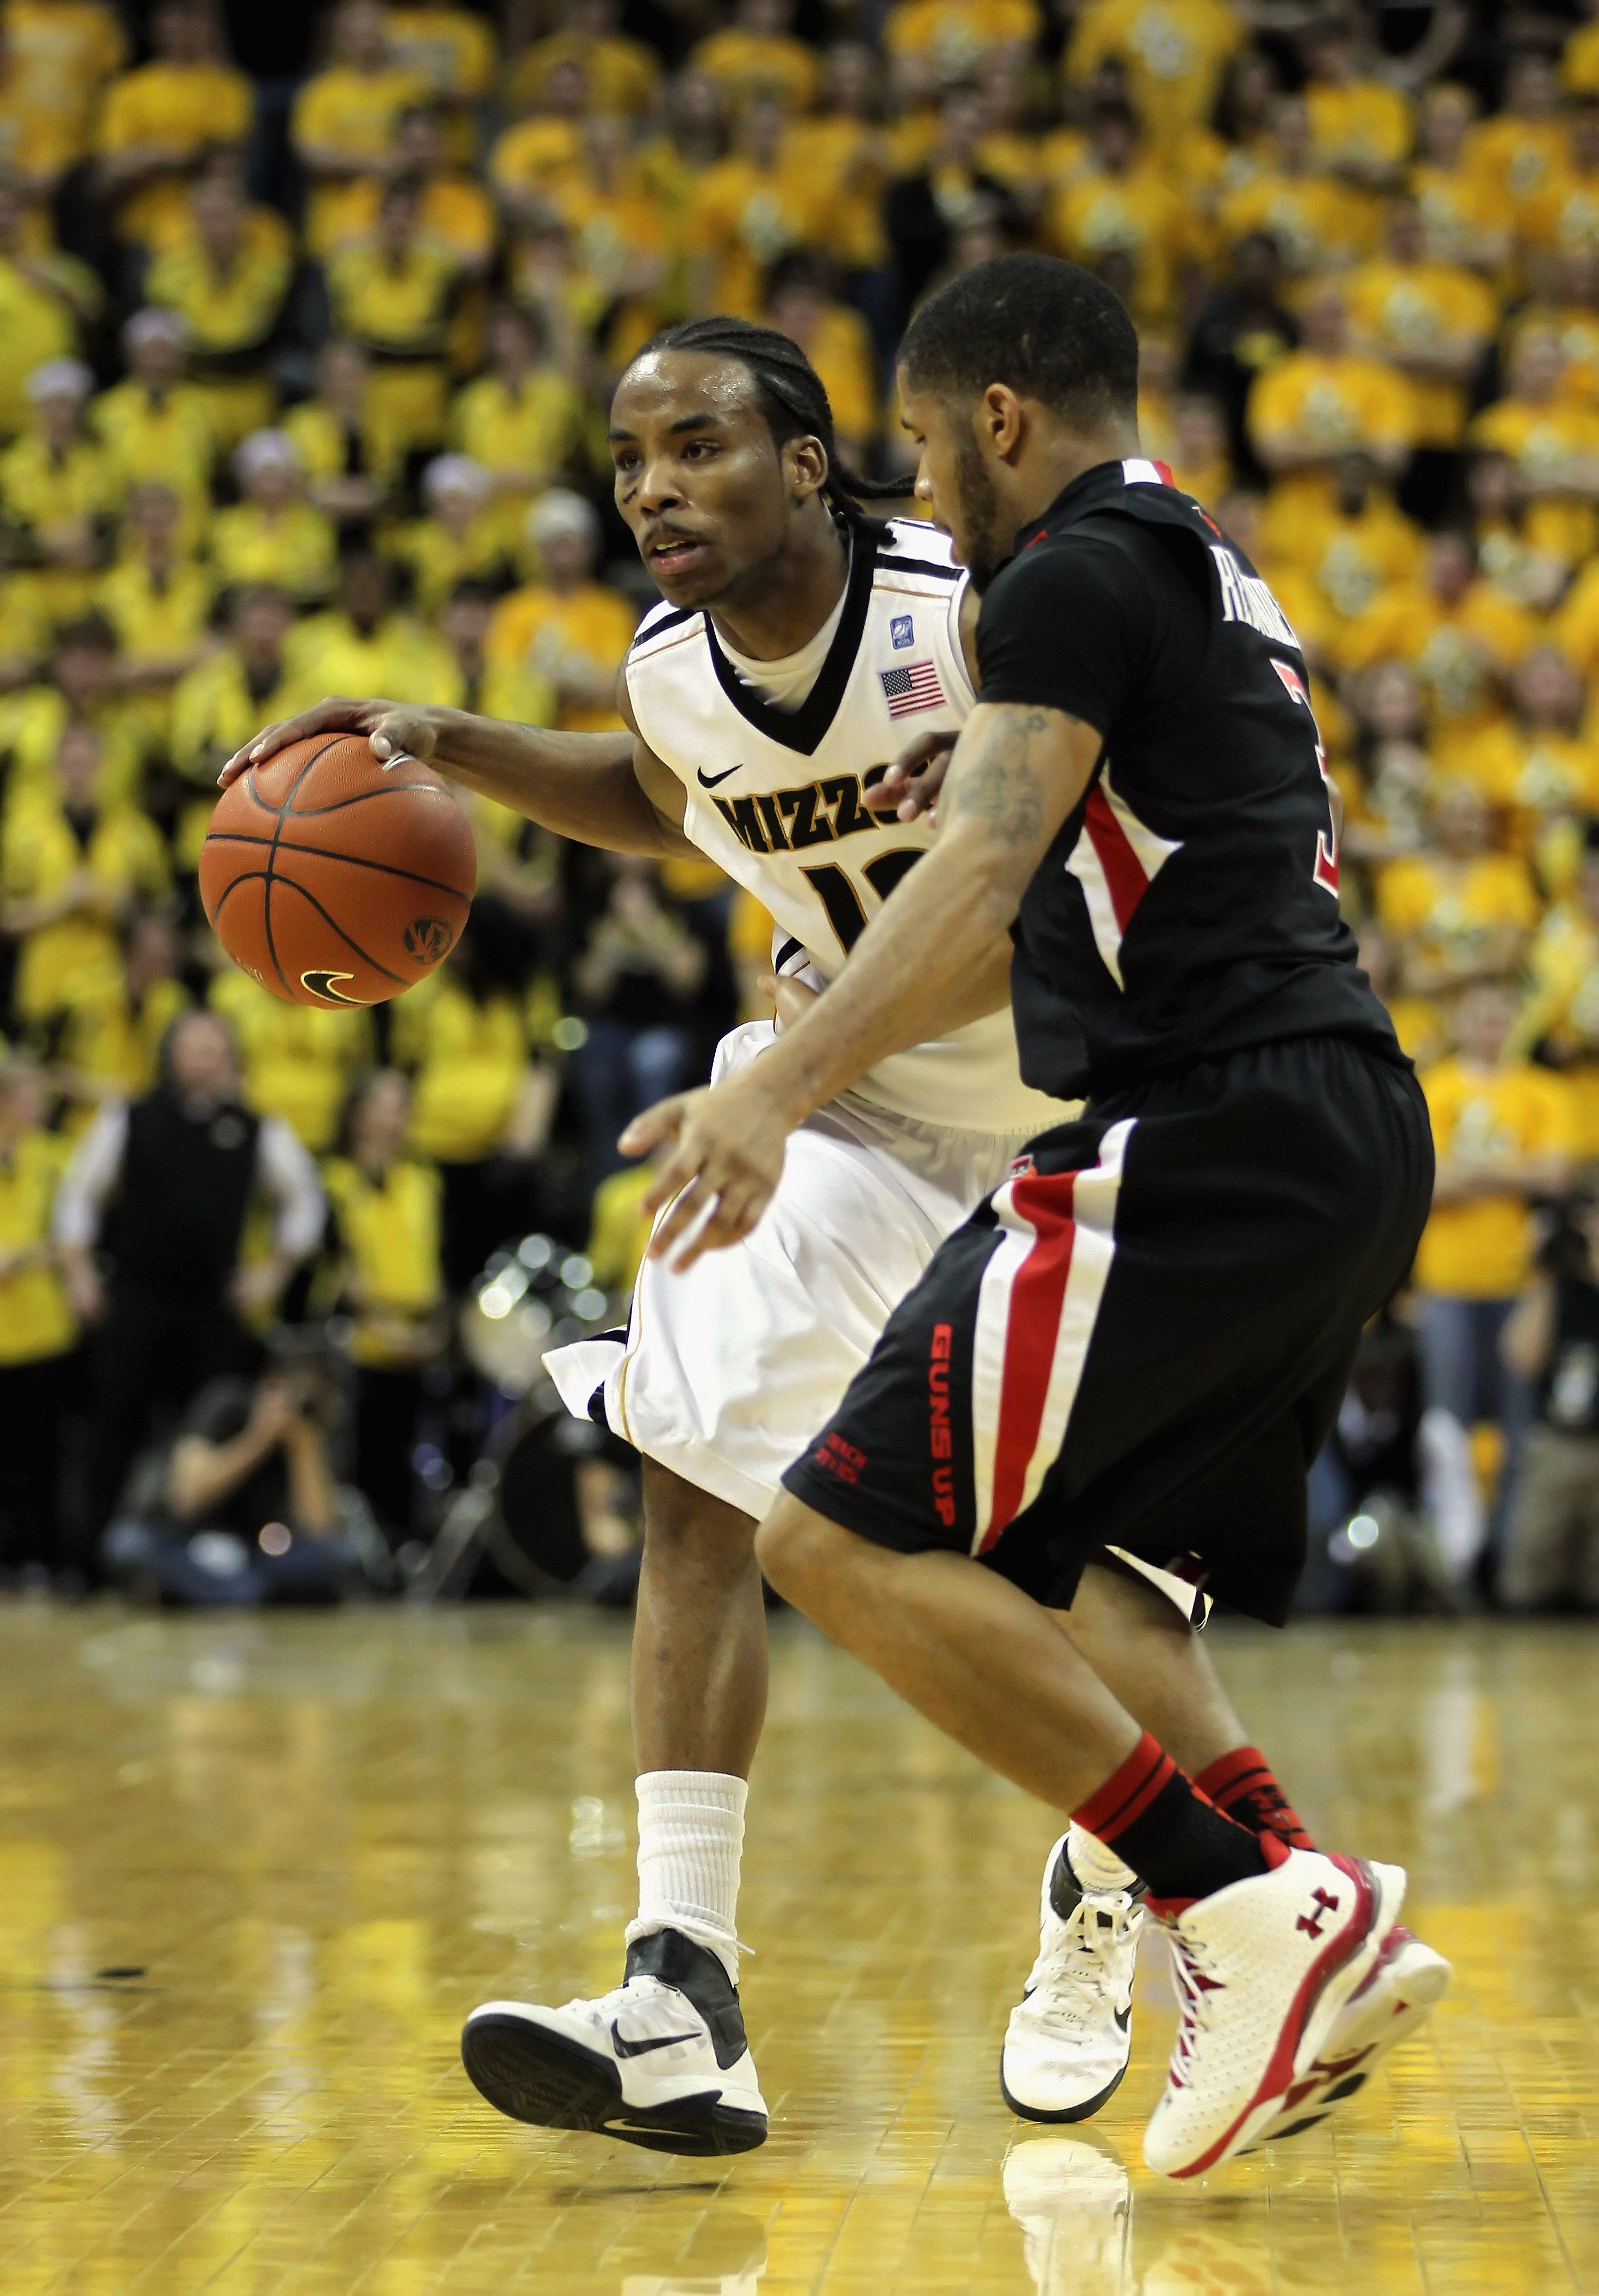 COLUMBIA, MO - FEBRUARY 15:  Marcus Denmon #12 of the Missouri Tigers controls the ball as Javarez Willis #3 of the Texas Tech Red Raiders defend during the game on February 15, 2011 at Mizzou Arena in Columbia, Missouri.  (Photo by Jamie Squire/Getty Ima